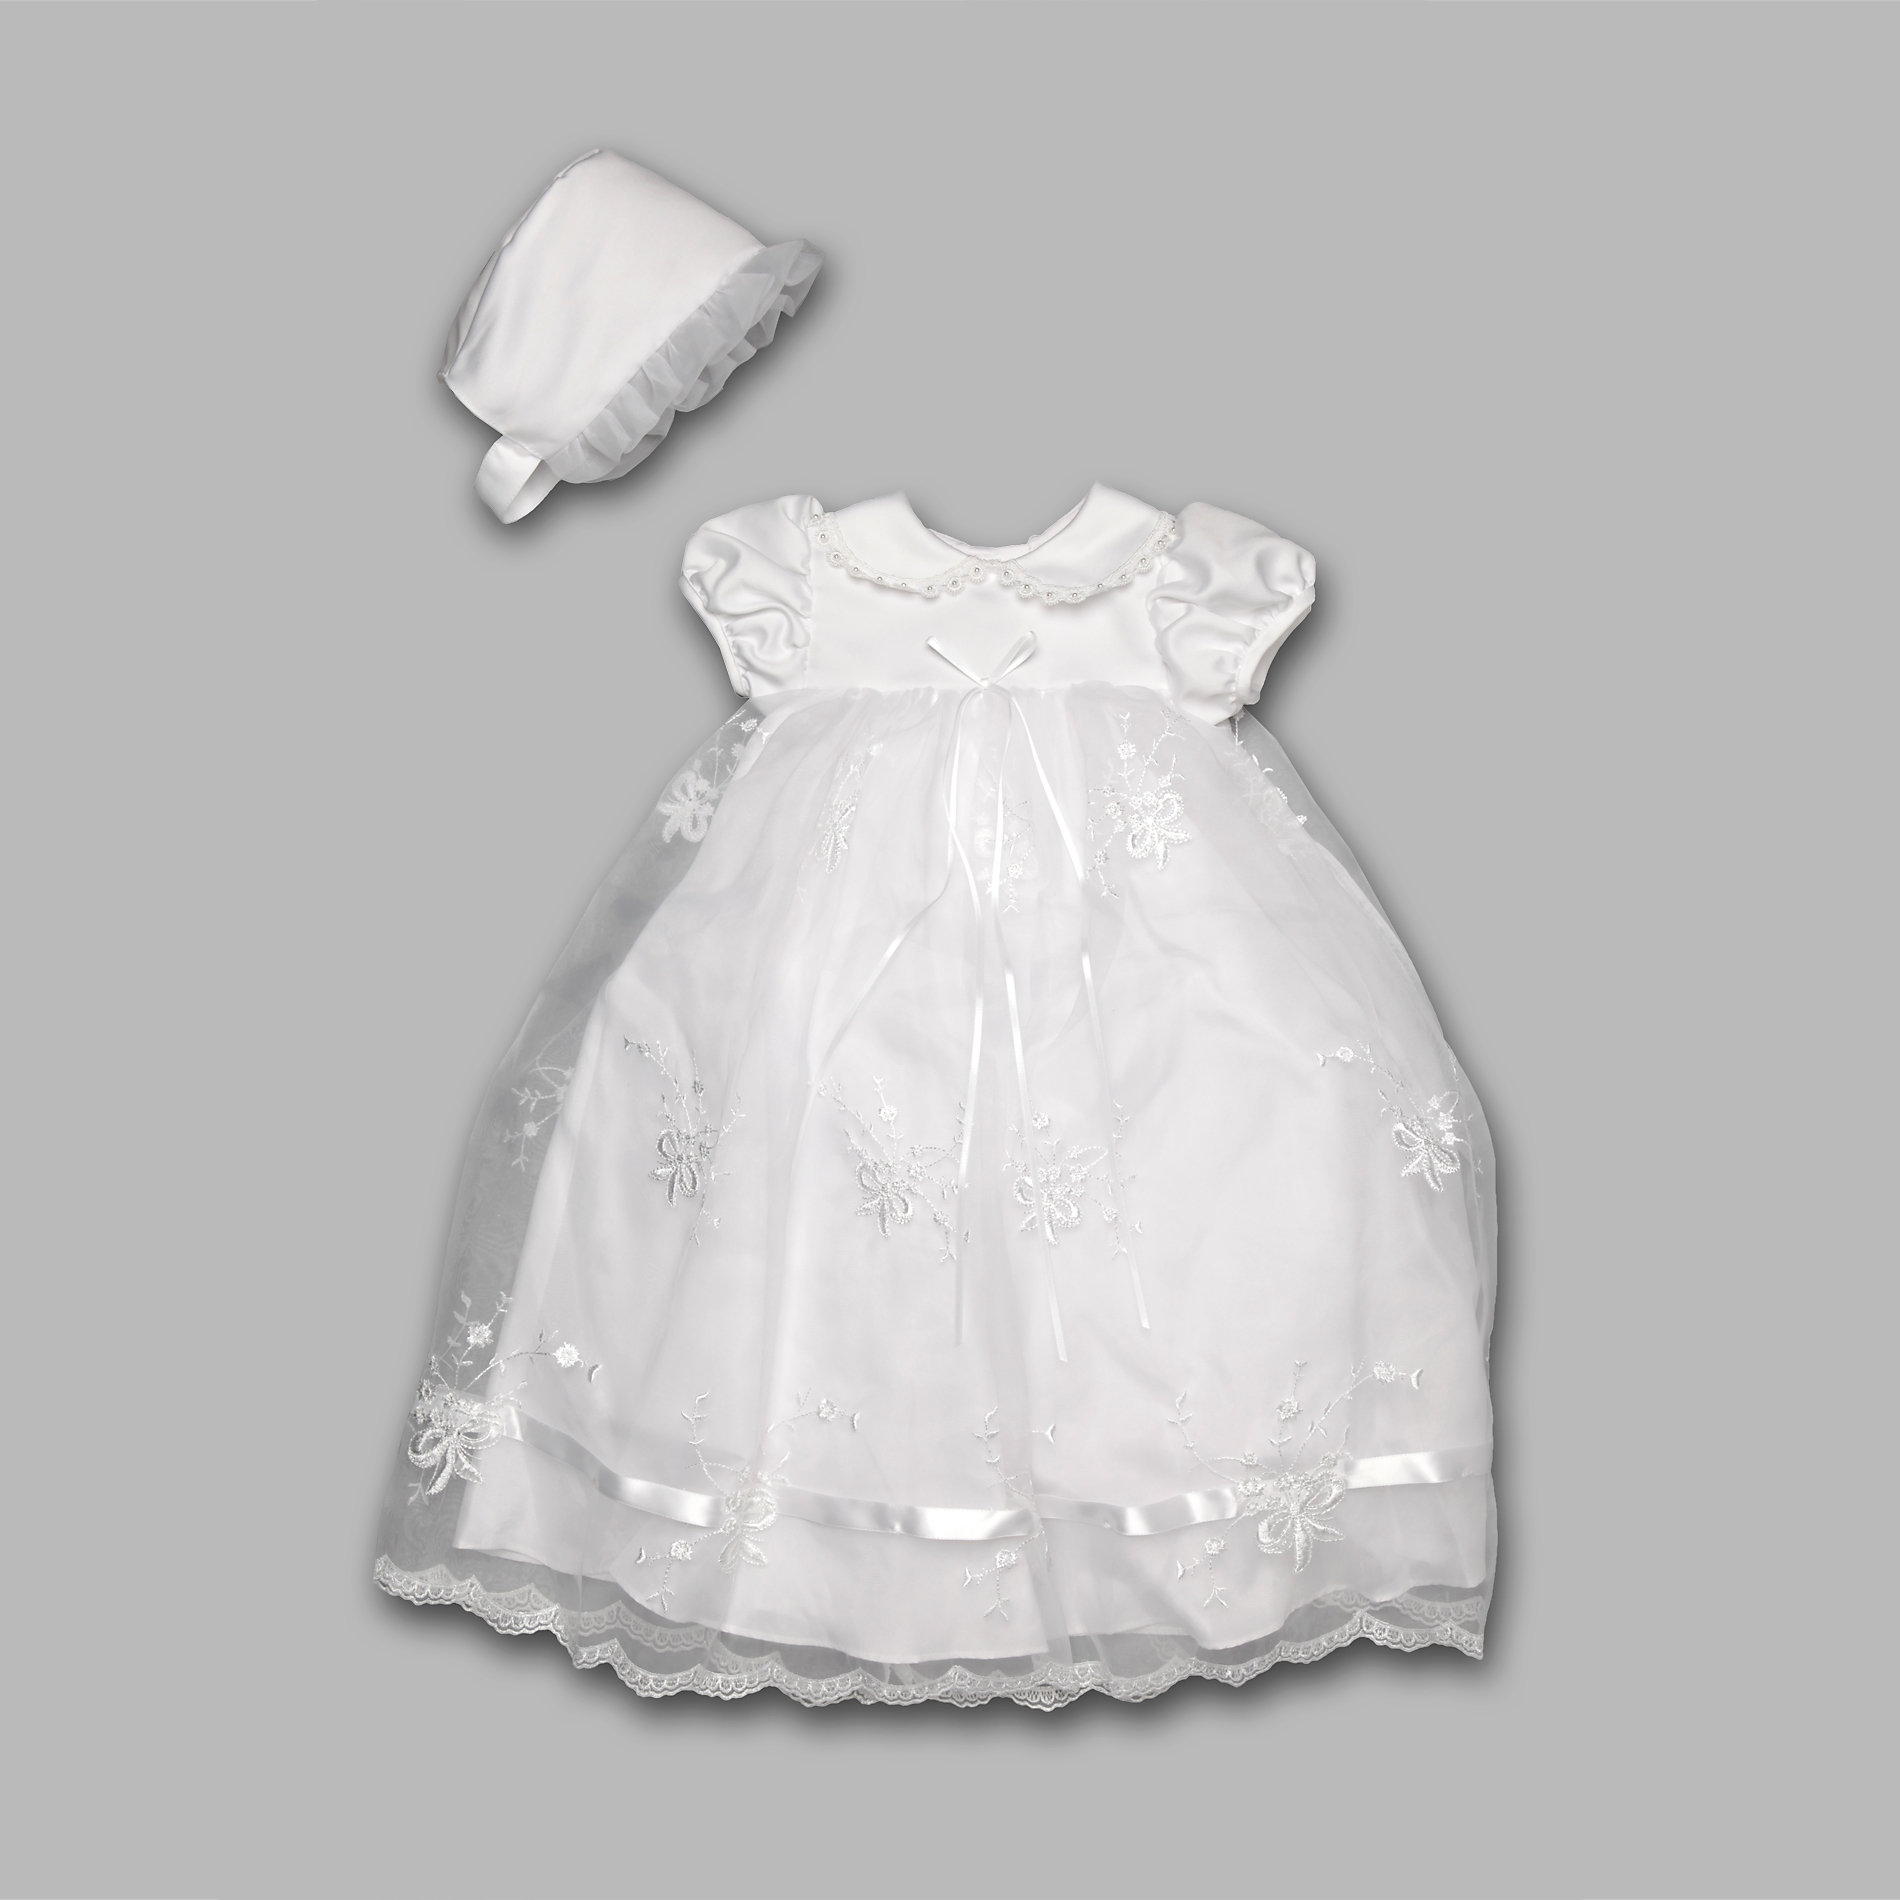 MaDonna Christening Long Embroidered Dress  Beaded Collar  with Cap